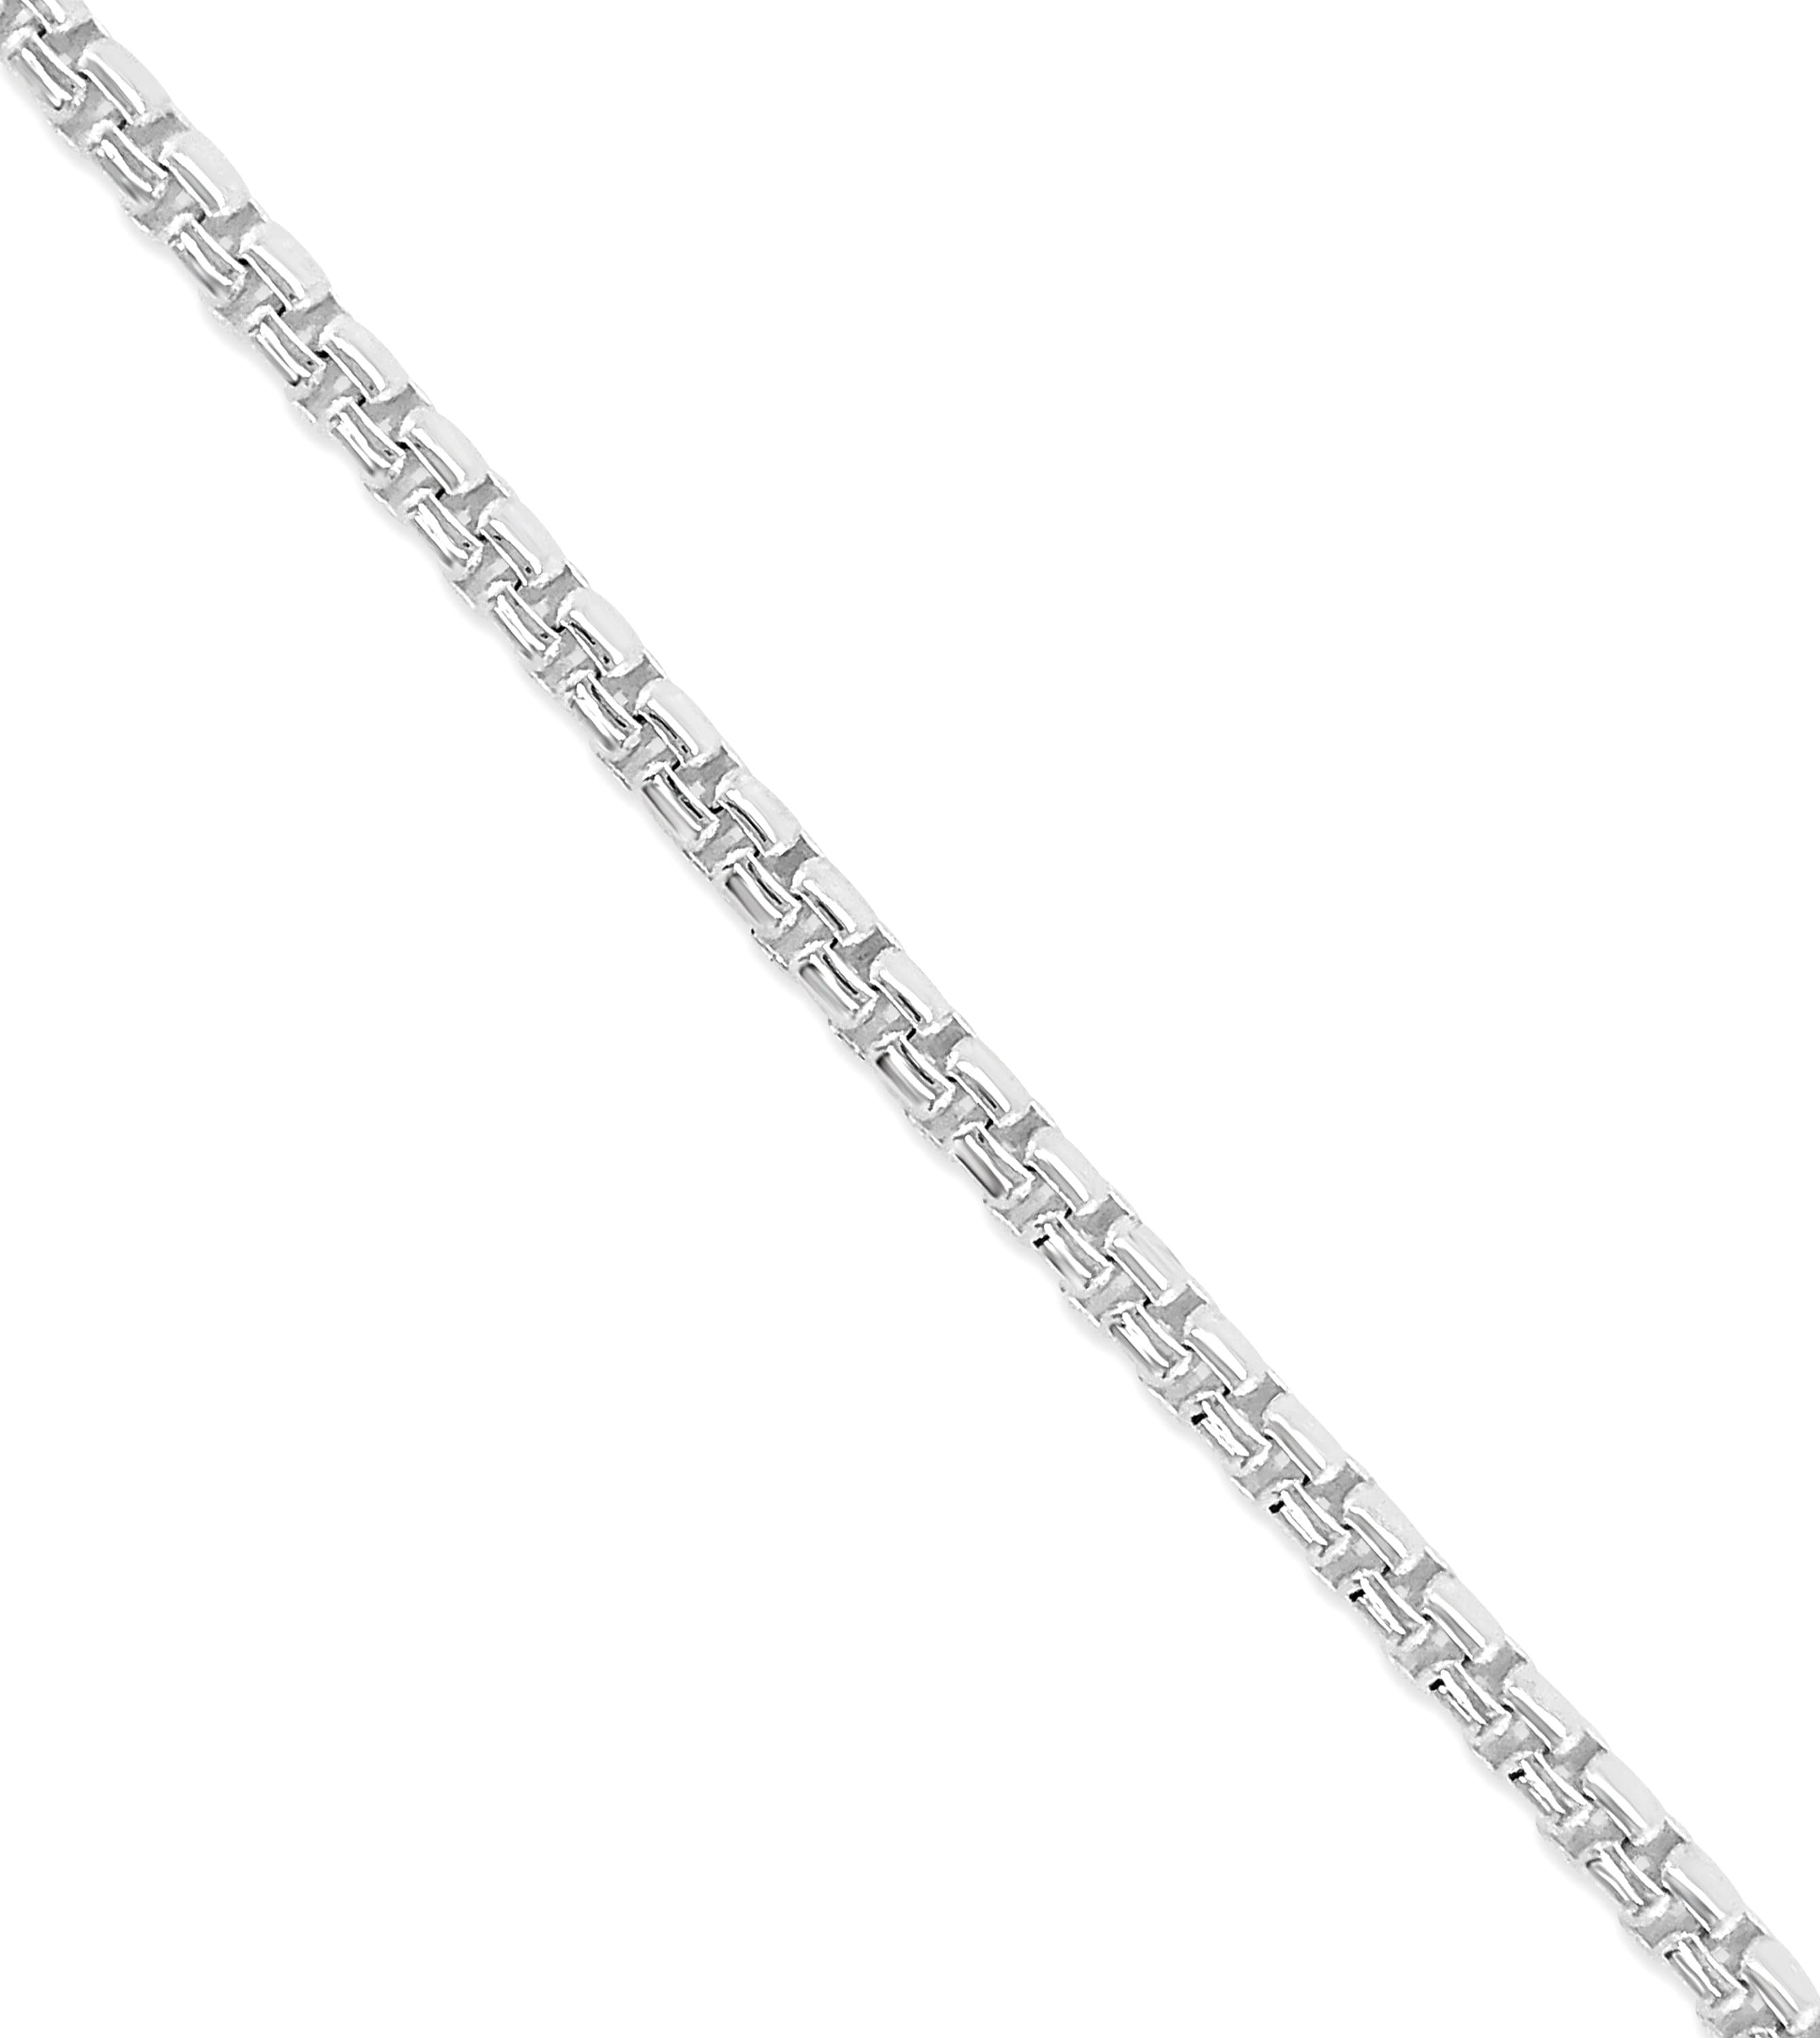 Conran KREMIX Silver Box Chain Necklace for Women Men 1.0 mm Thin Chain Necklace Non-Tarnish 16/18/20/22/24/30/36 inch Stainless Steel Necklace for